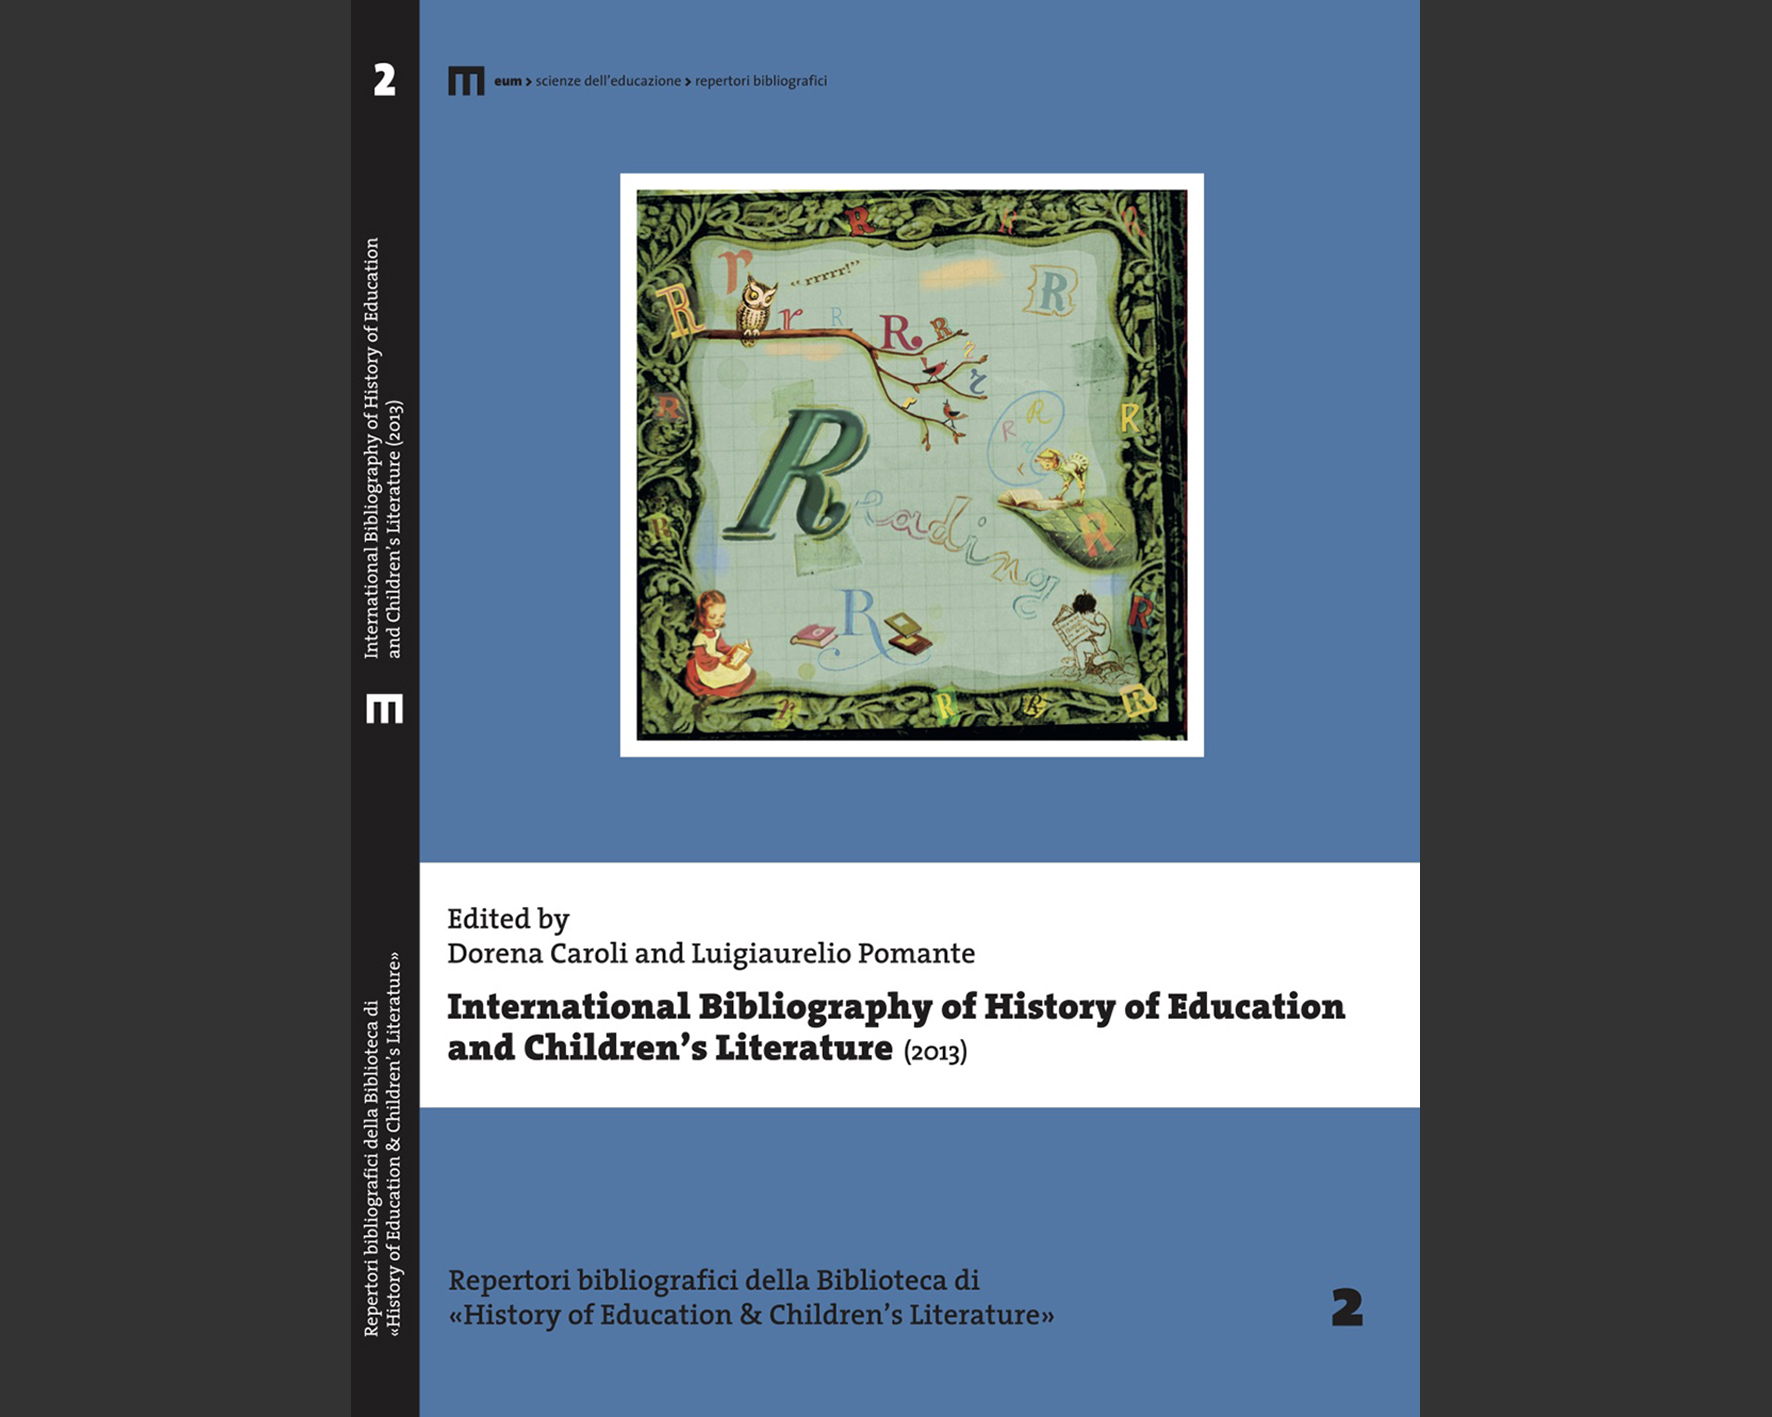 International Bibliography of History of Education and Children’s Literature 2013